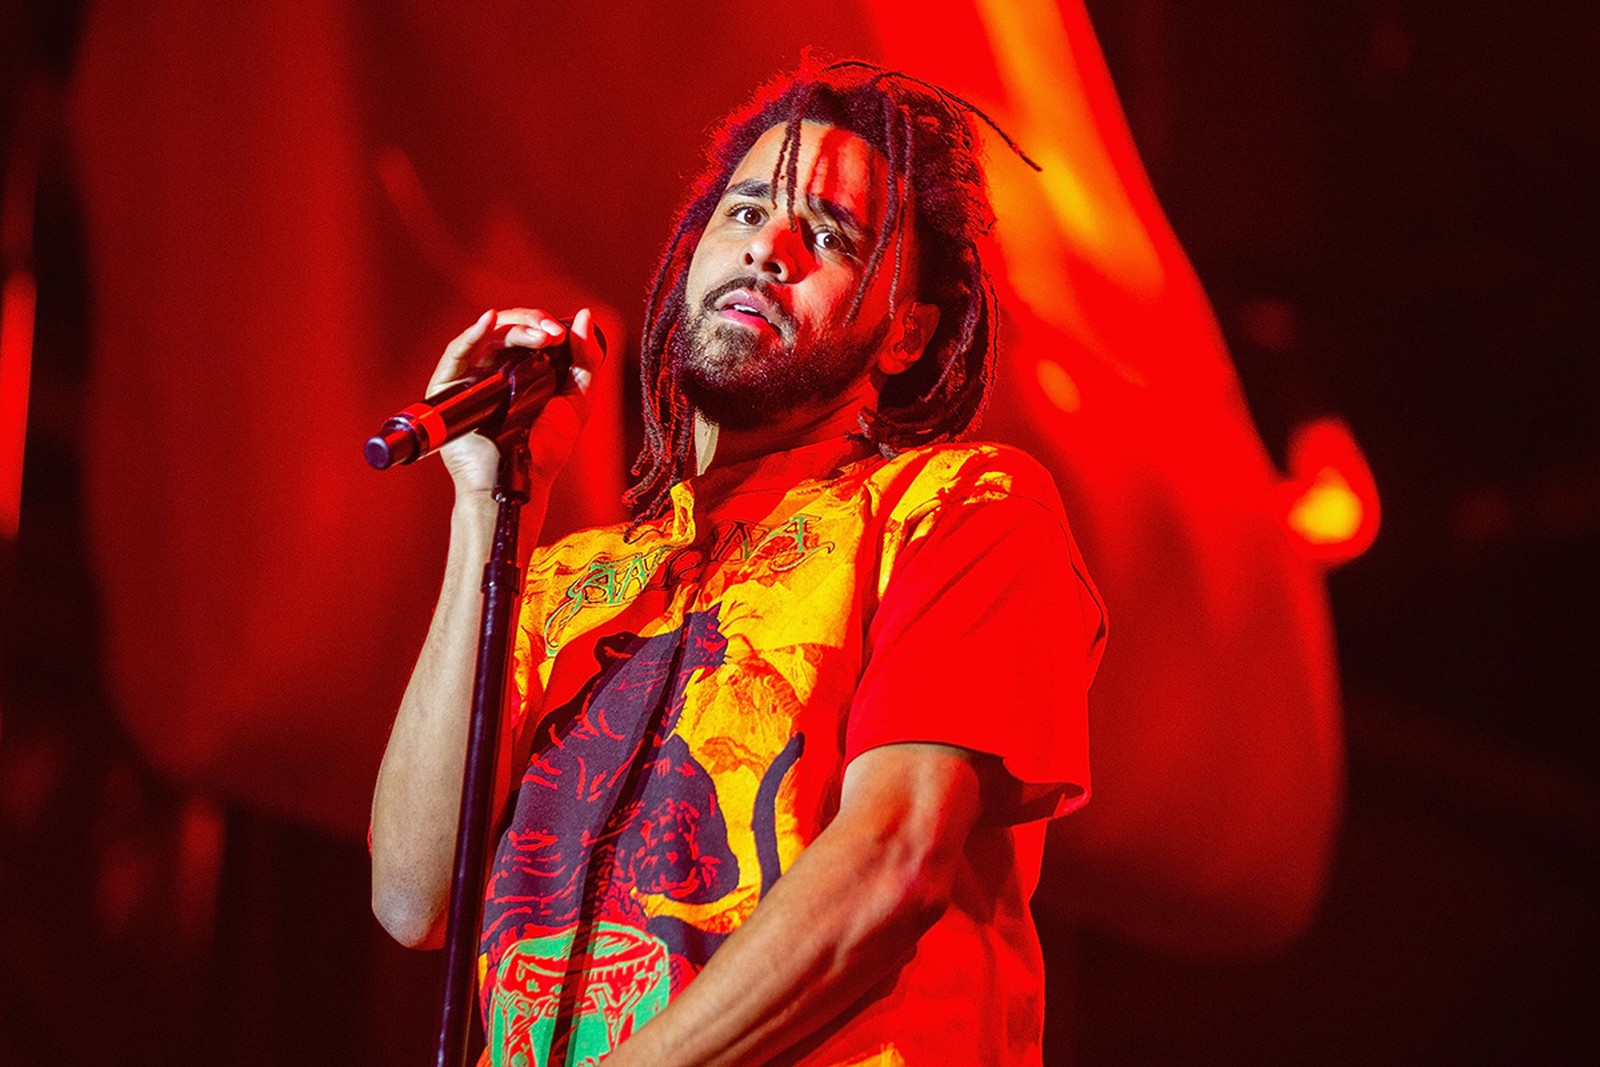 J Cole’s Dreamville Launches Brand New Media Company and Content Studio